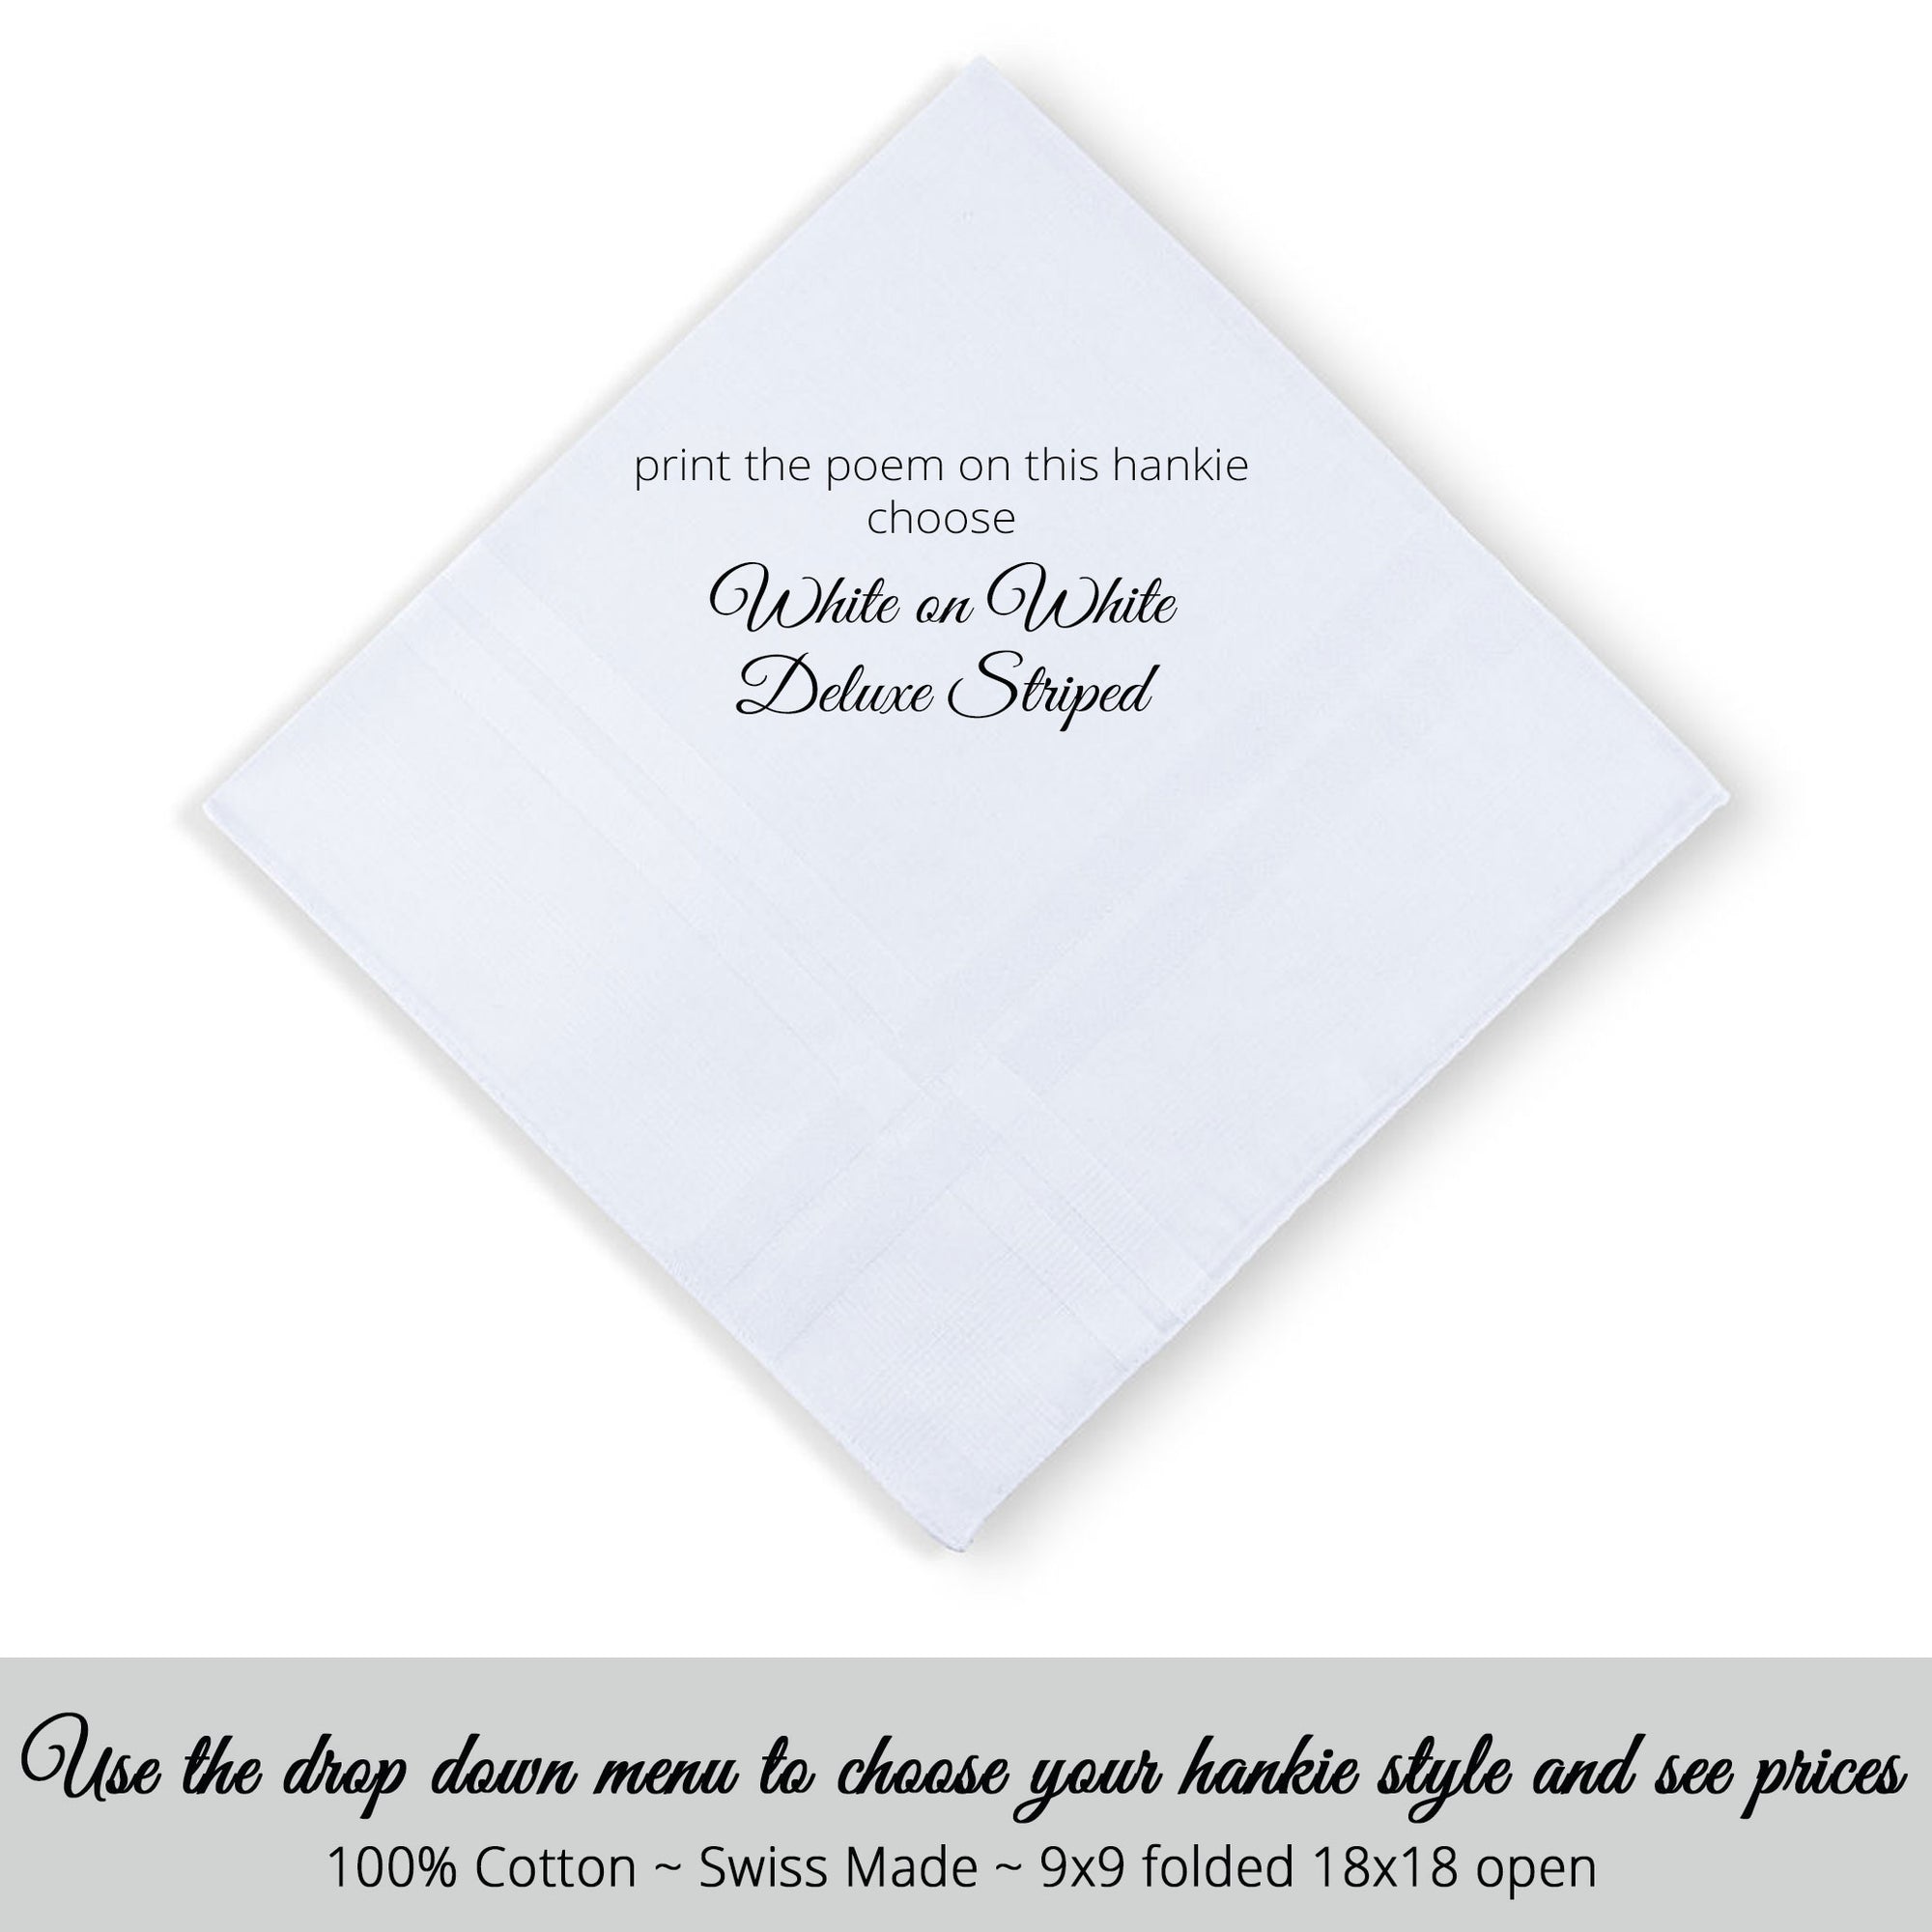 Gay Wedding Masculine Hankie style Swiss made white on white deluxe striped for the Father of the Bride poem printed hankie